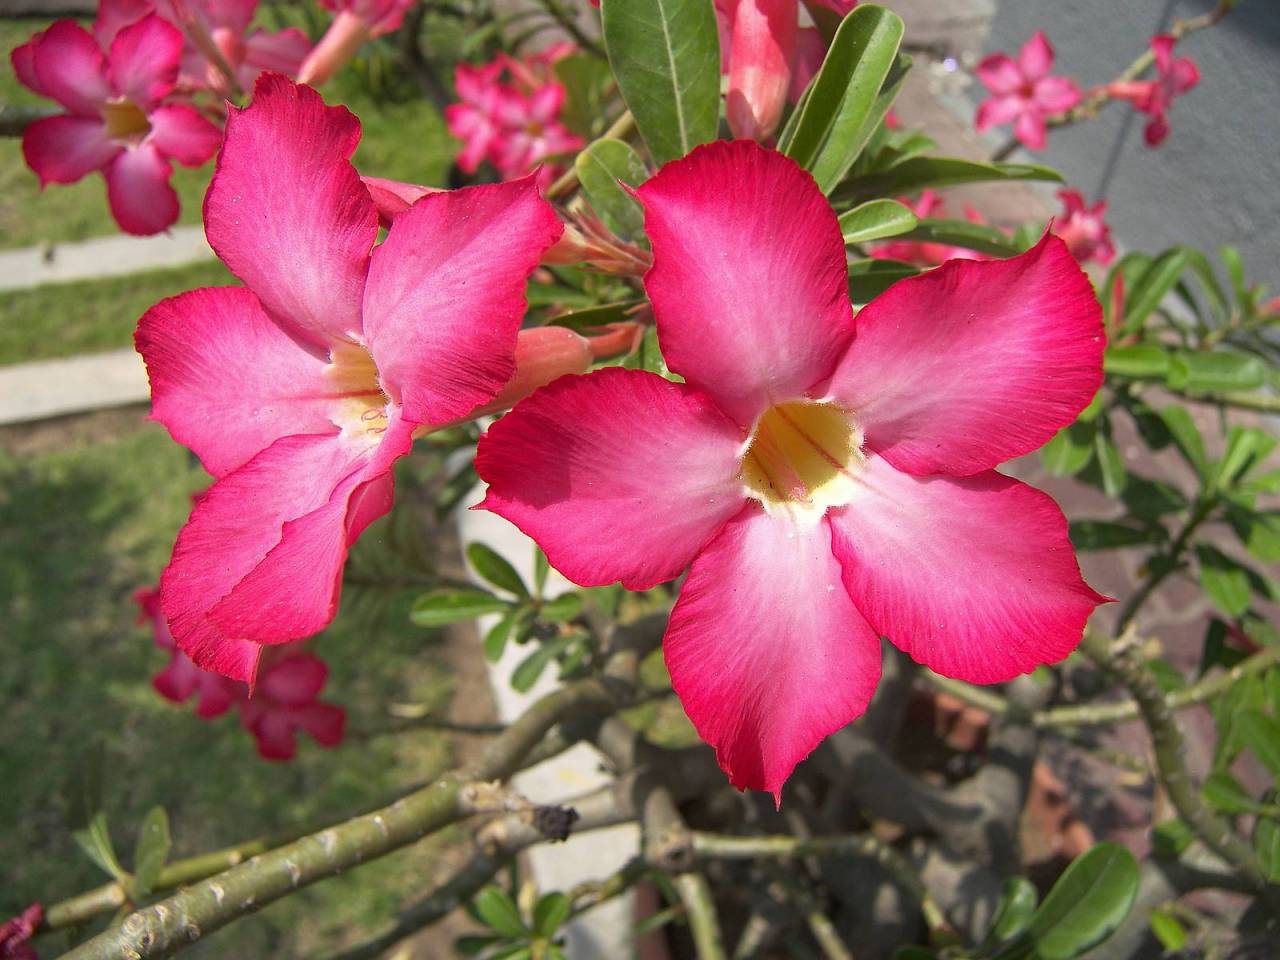 res themes tumblr high of oleander is  plant toxic, The bit the Every unlike